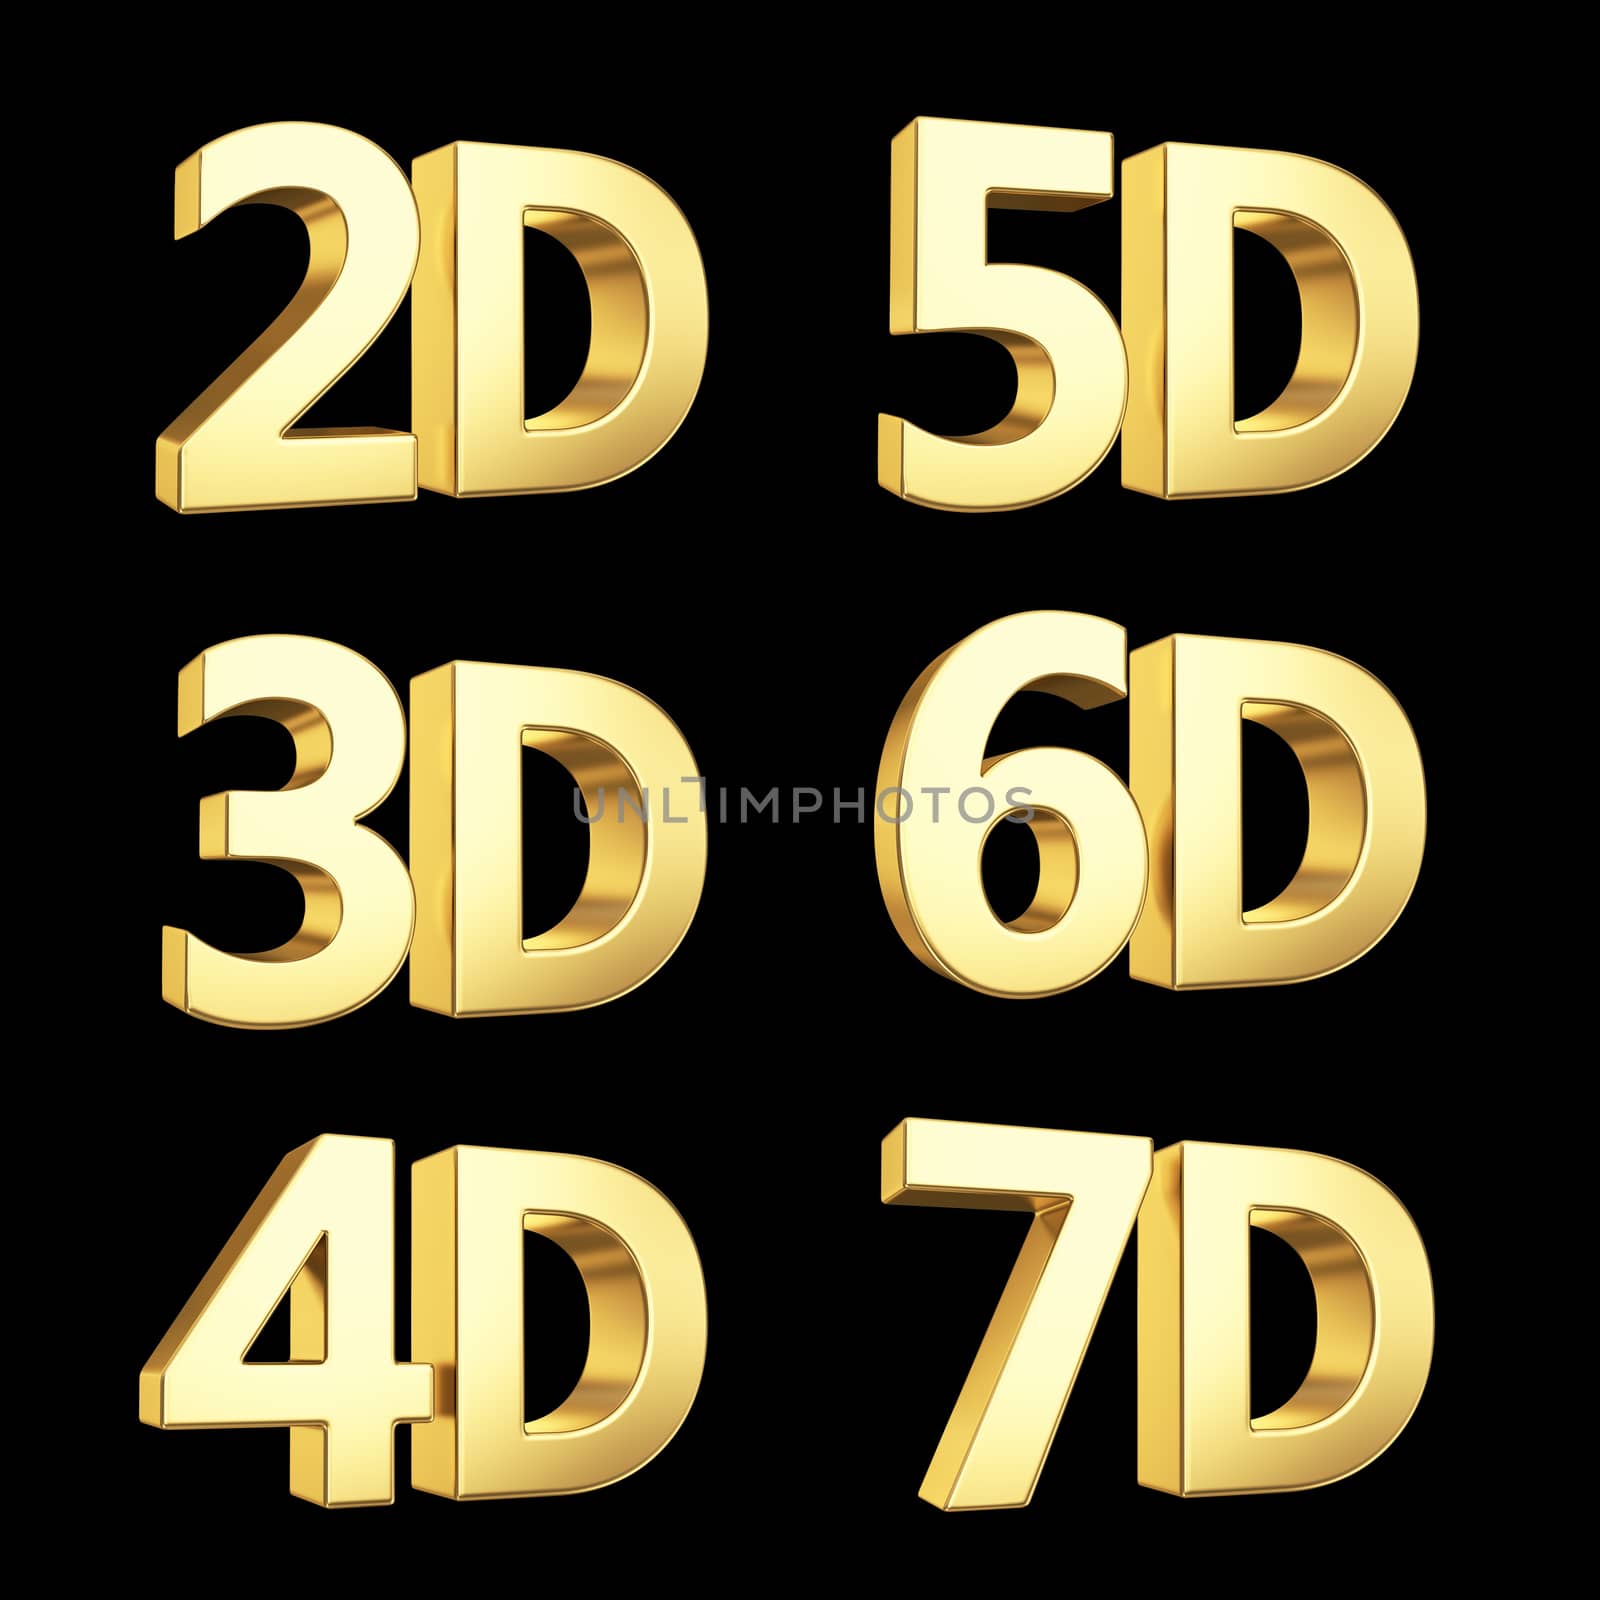 Golden dimension symbols isolated on black
 by 123dartist